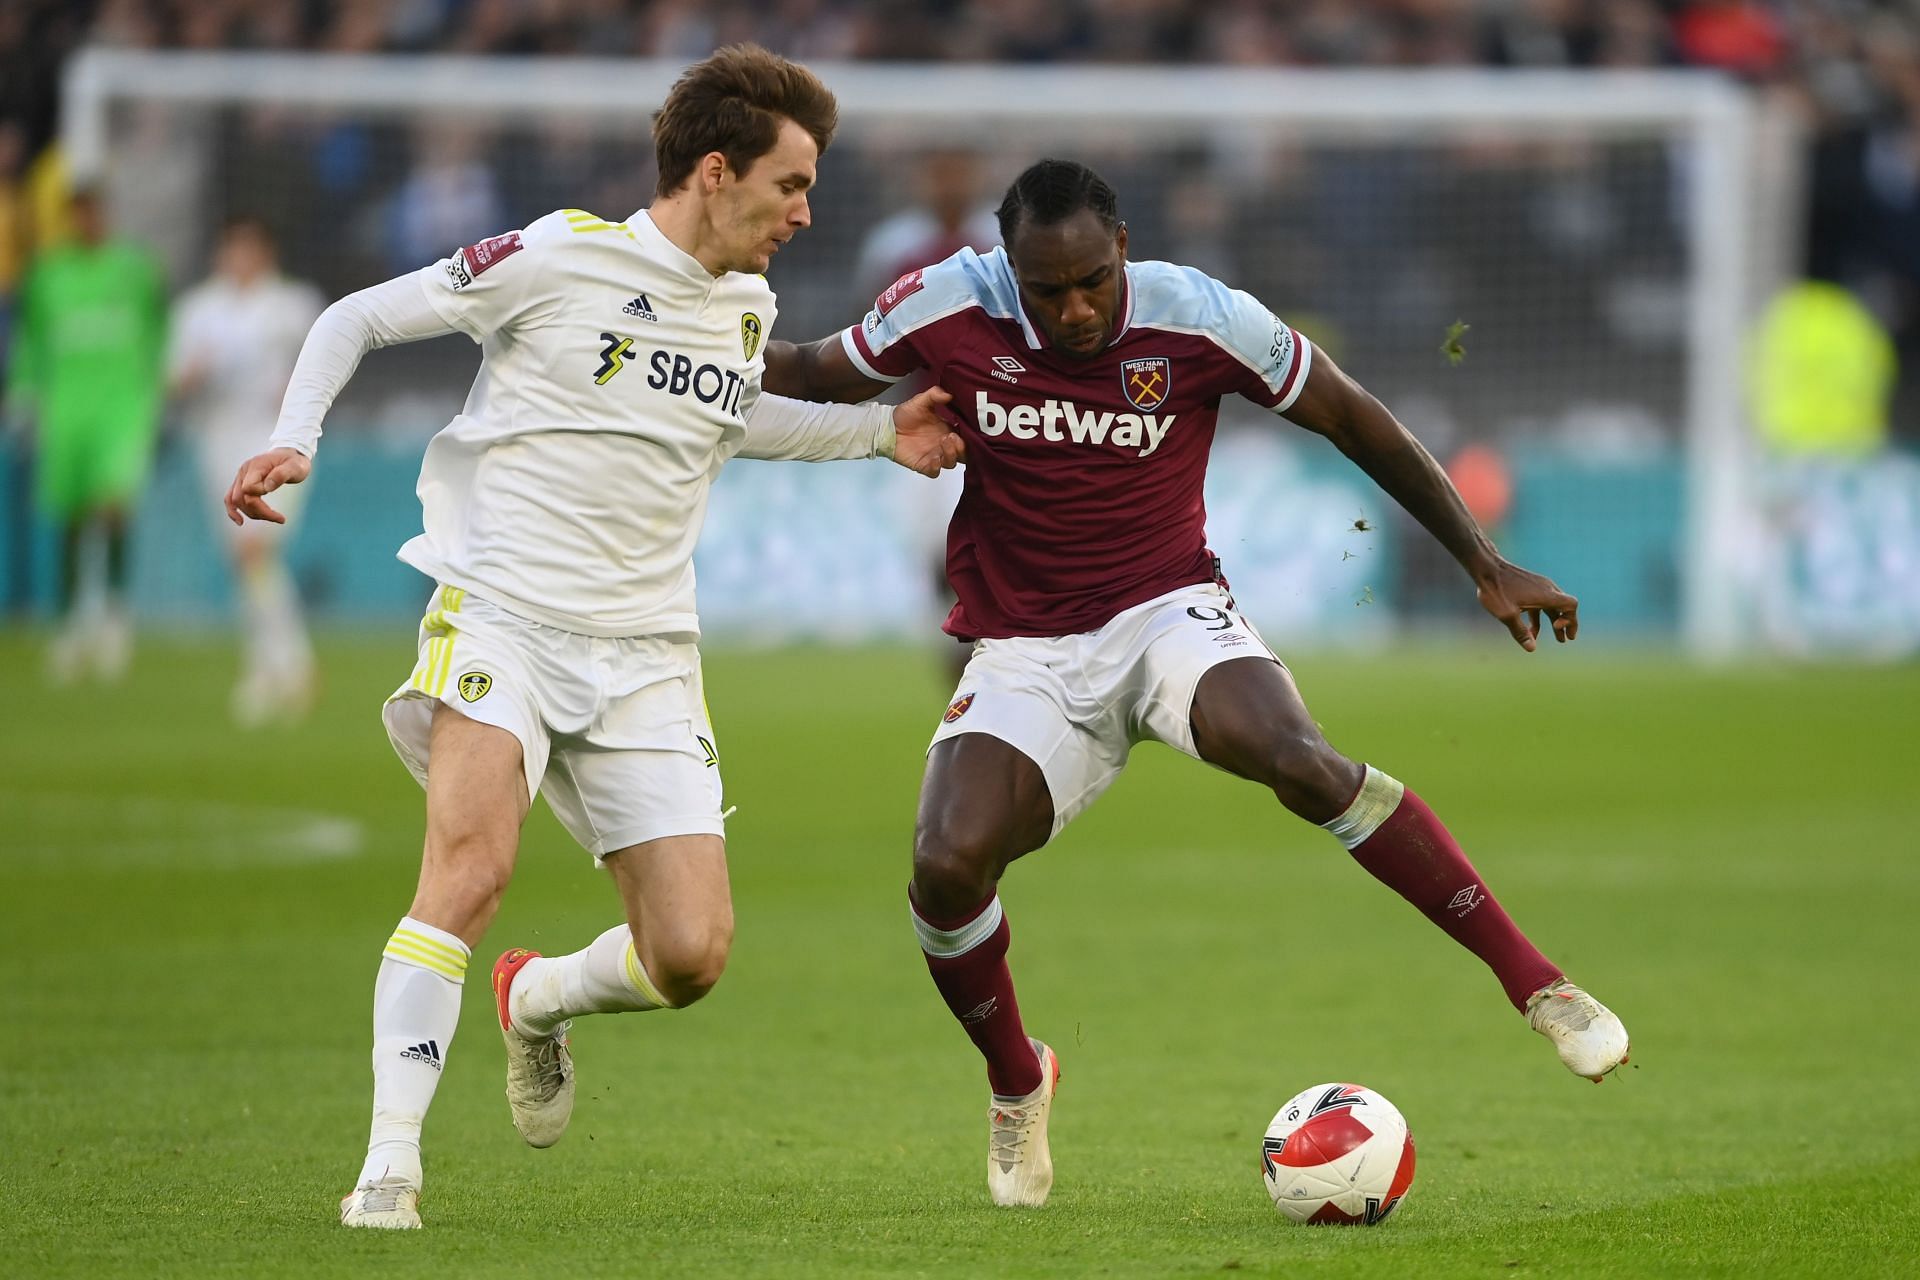 West Ham United vs Leeds United Prediction and Betting Tips